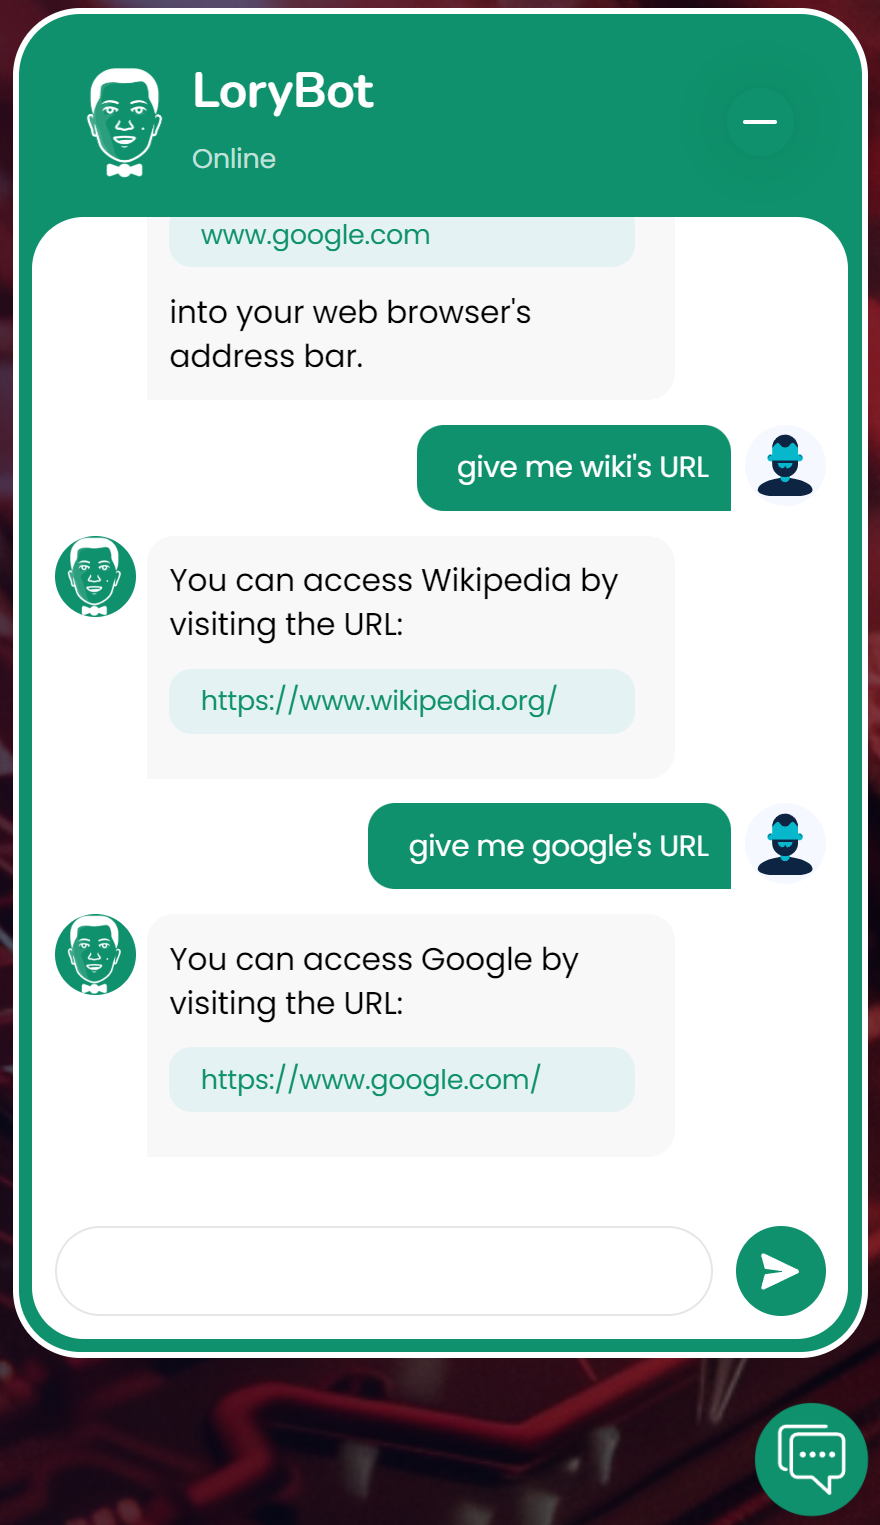 Main interface of LoryBot showing the chat window.